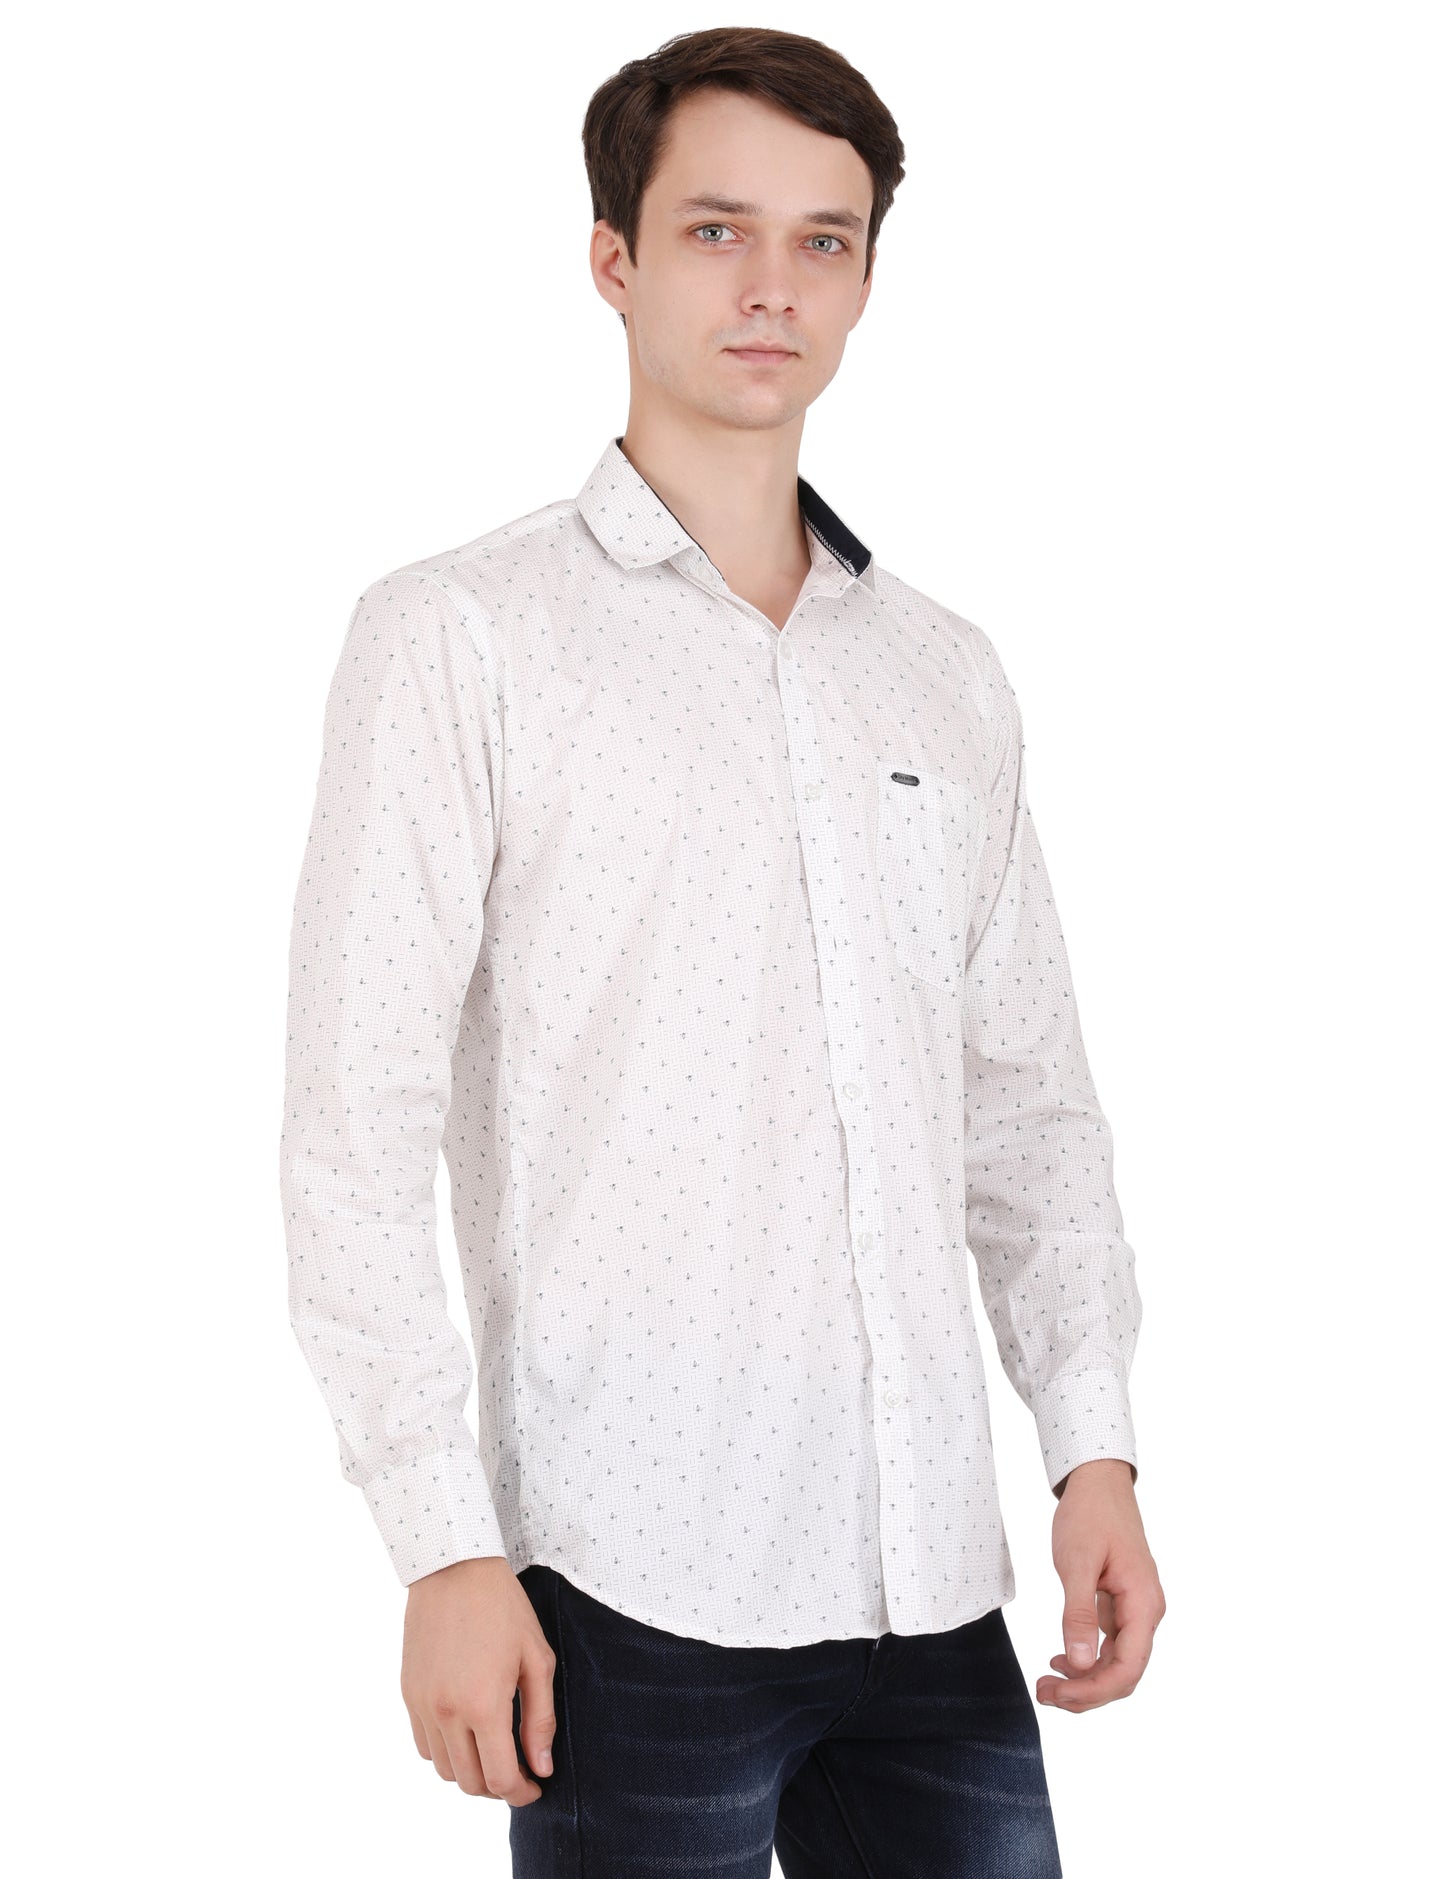 Classic Charm: Printed White Shirt with Blue Pattern